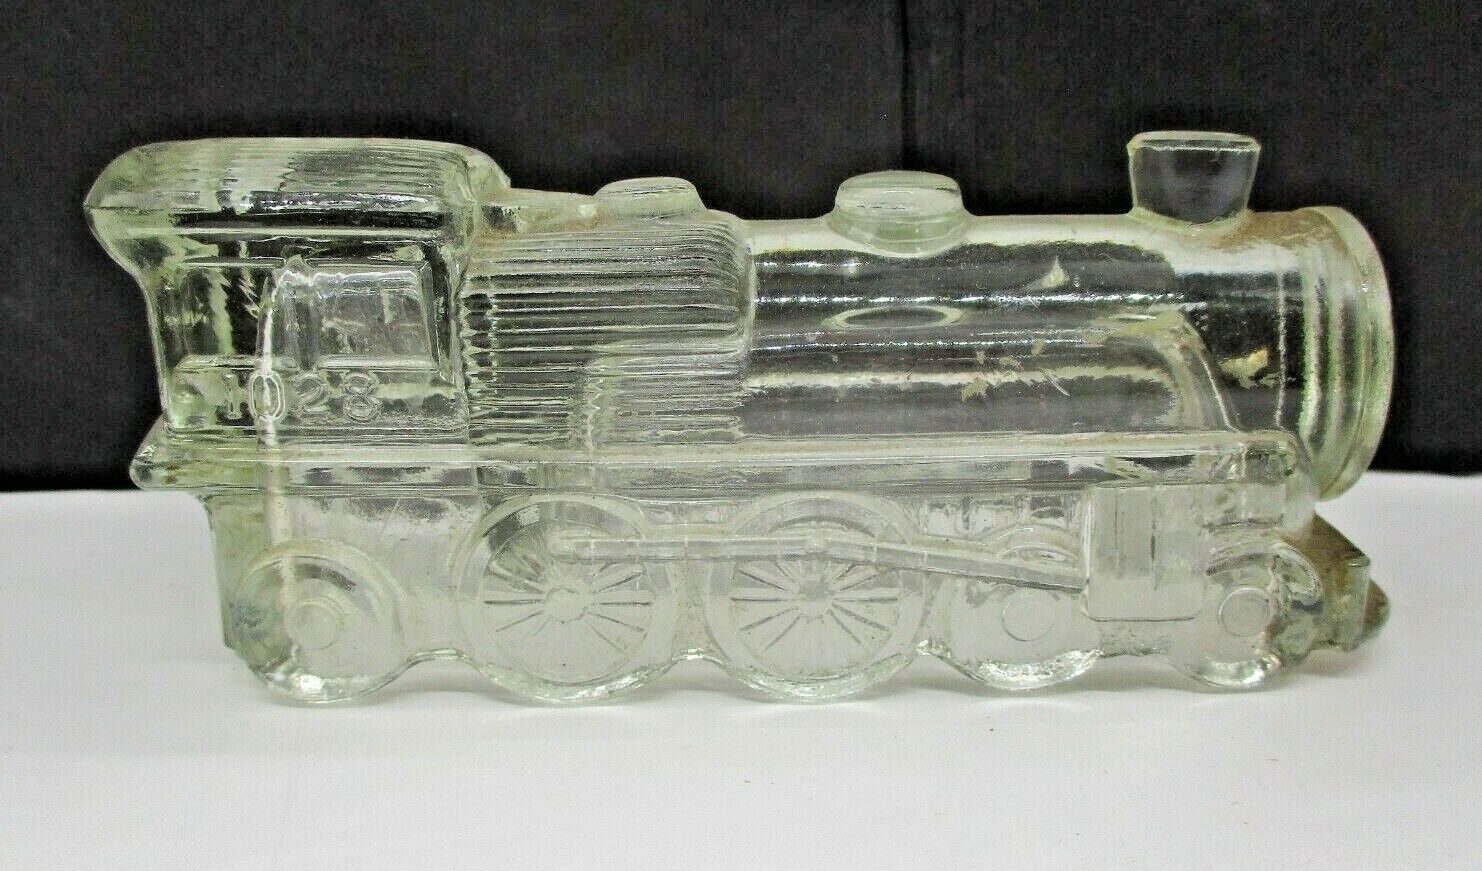  Vintage Glass Candy Container Train Locomotive